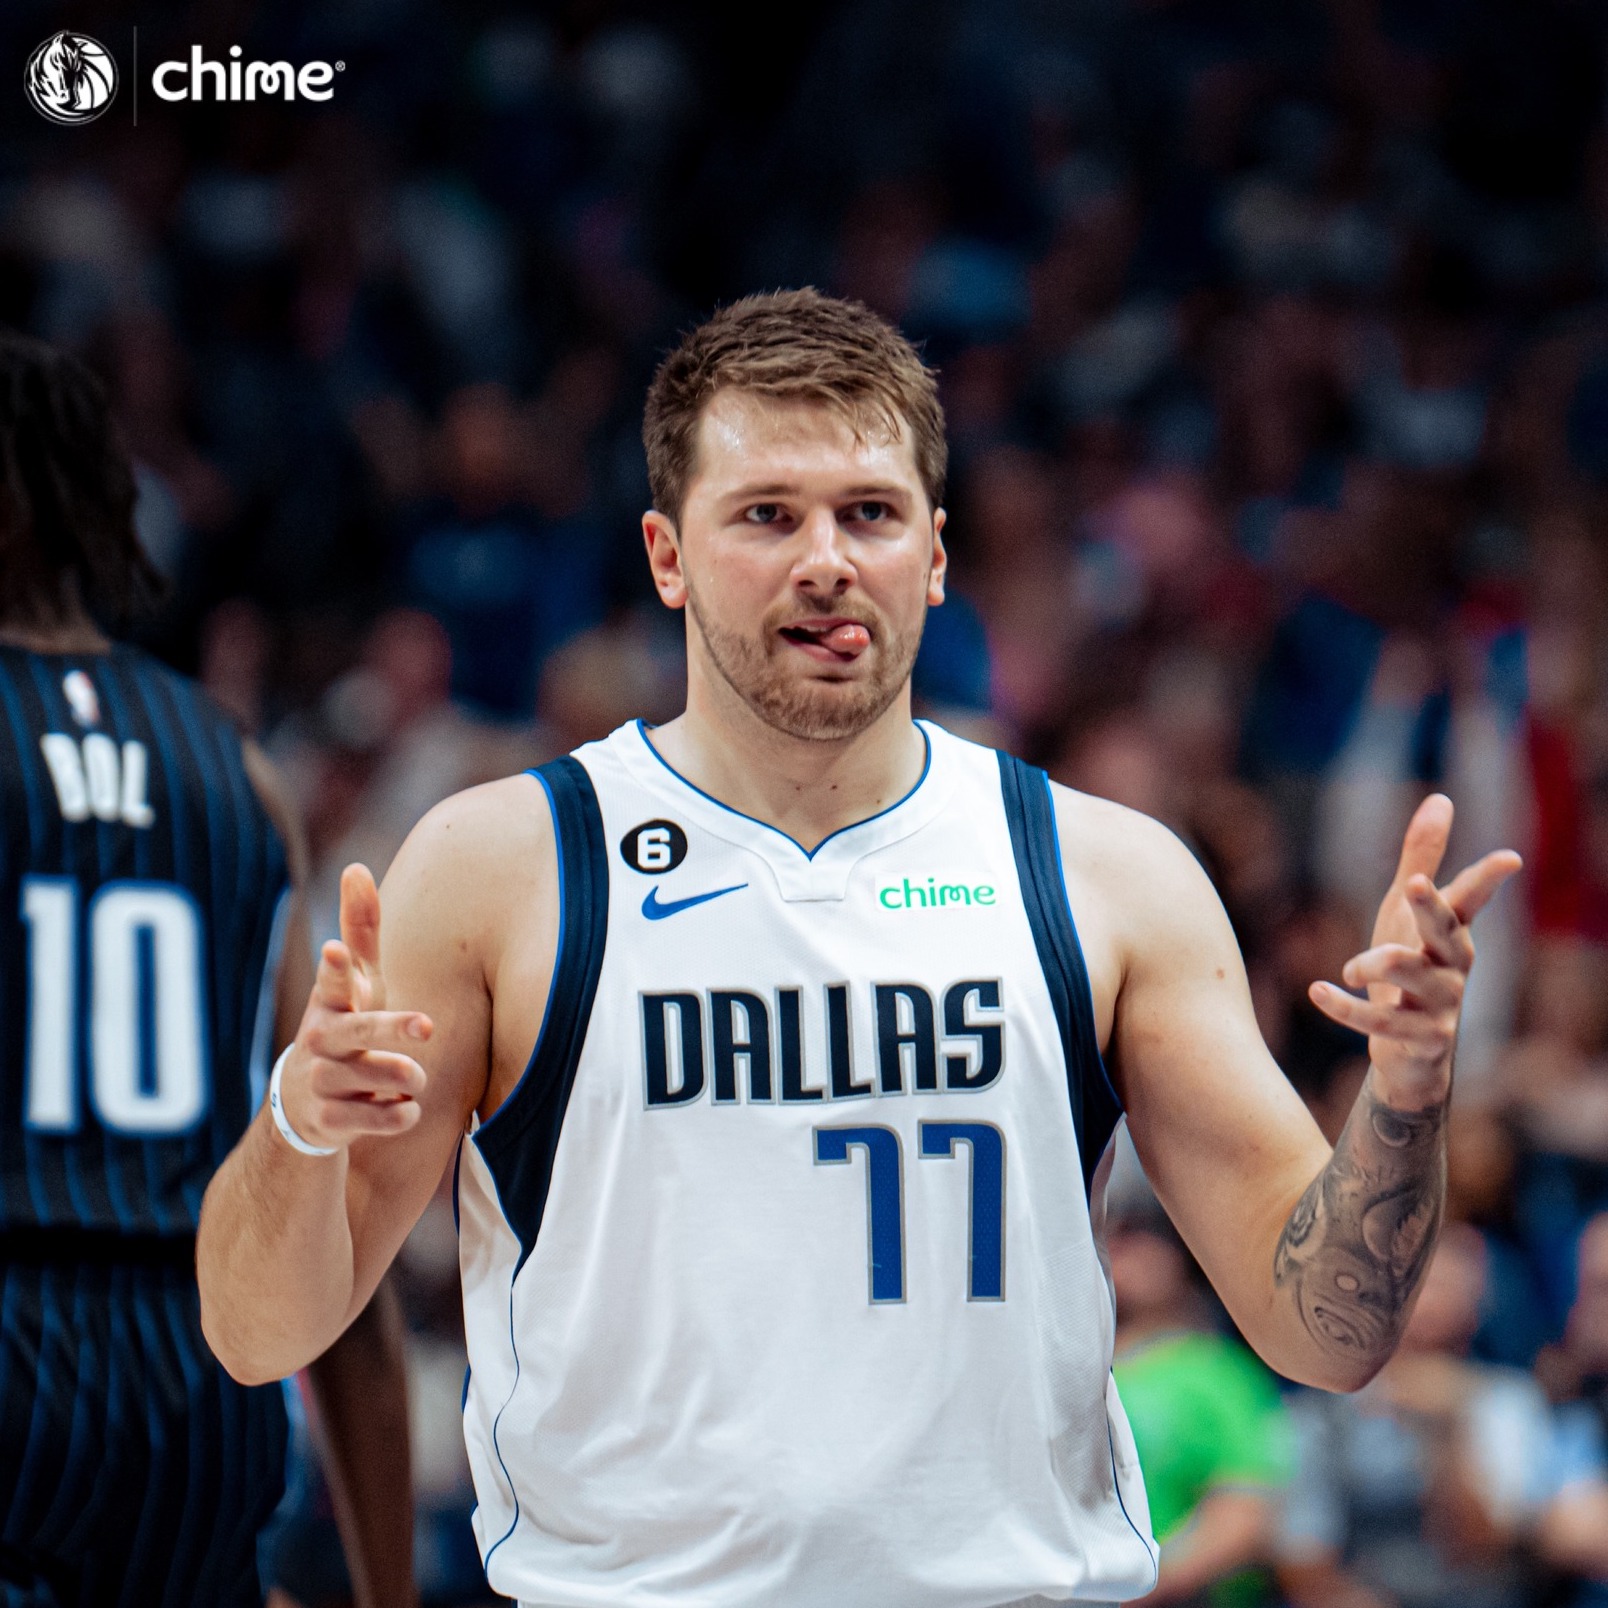 NBA teams with the most fans in the Philippines: Dallas Mavericks (Luka Doncic)